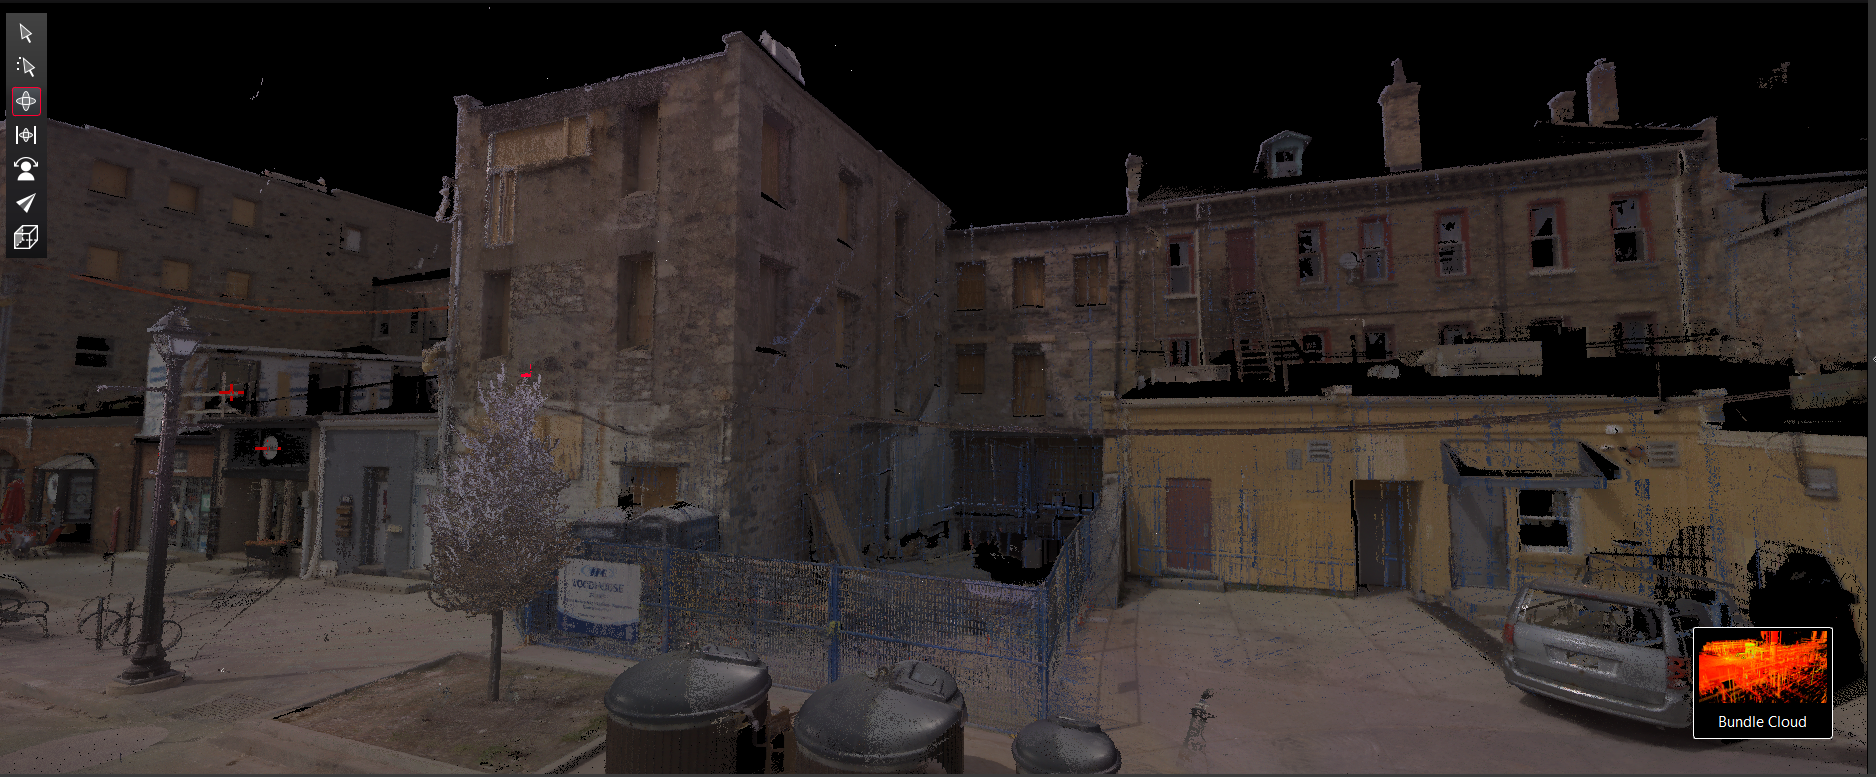 3D POINT CLOUD CLEANING / PROCESSING & REGISTERING